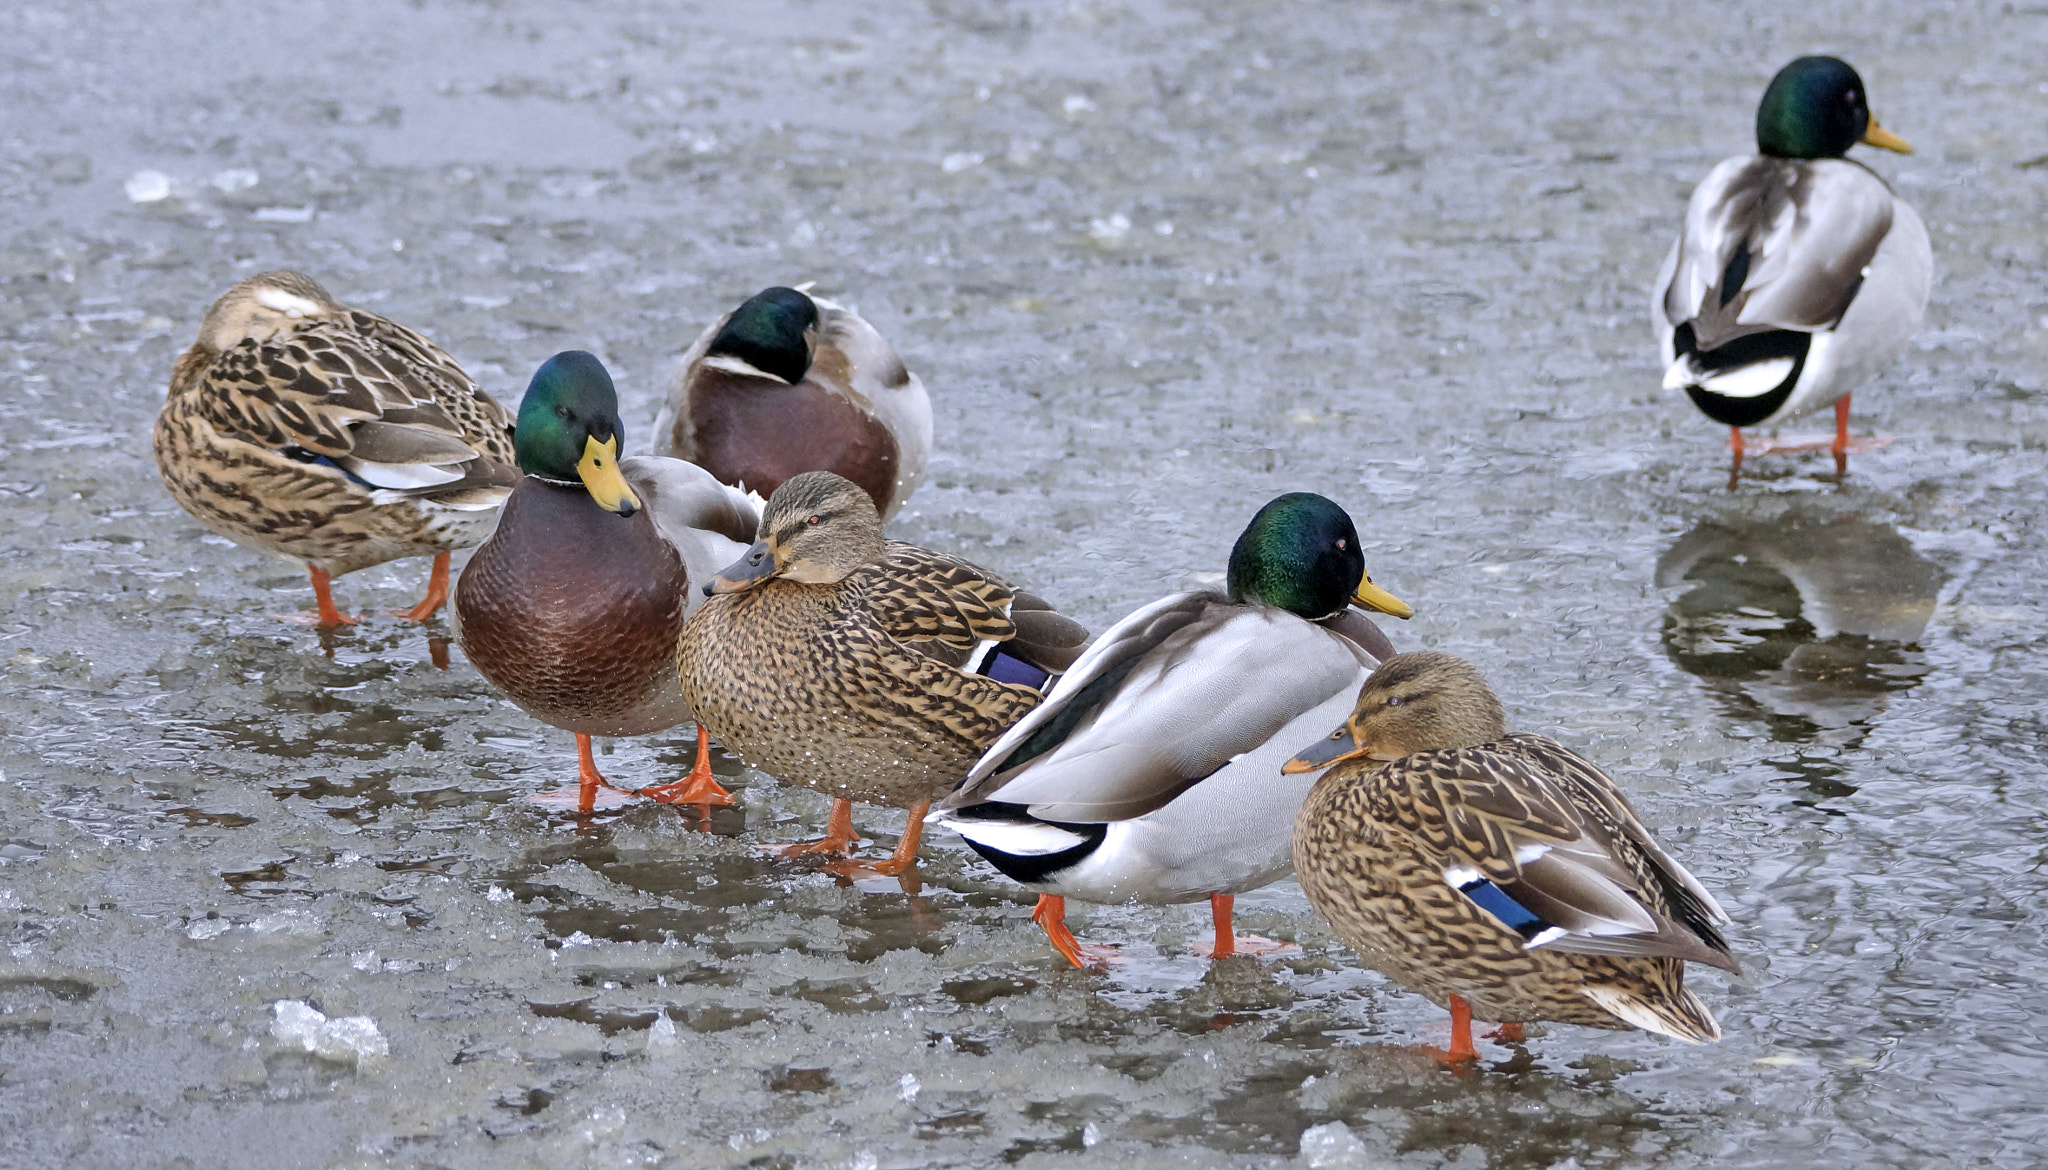 Sony SLT-A77 sample photo. Ducks standing in the frozen water photography